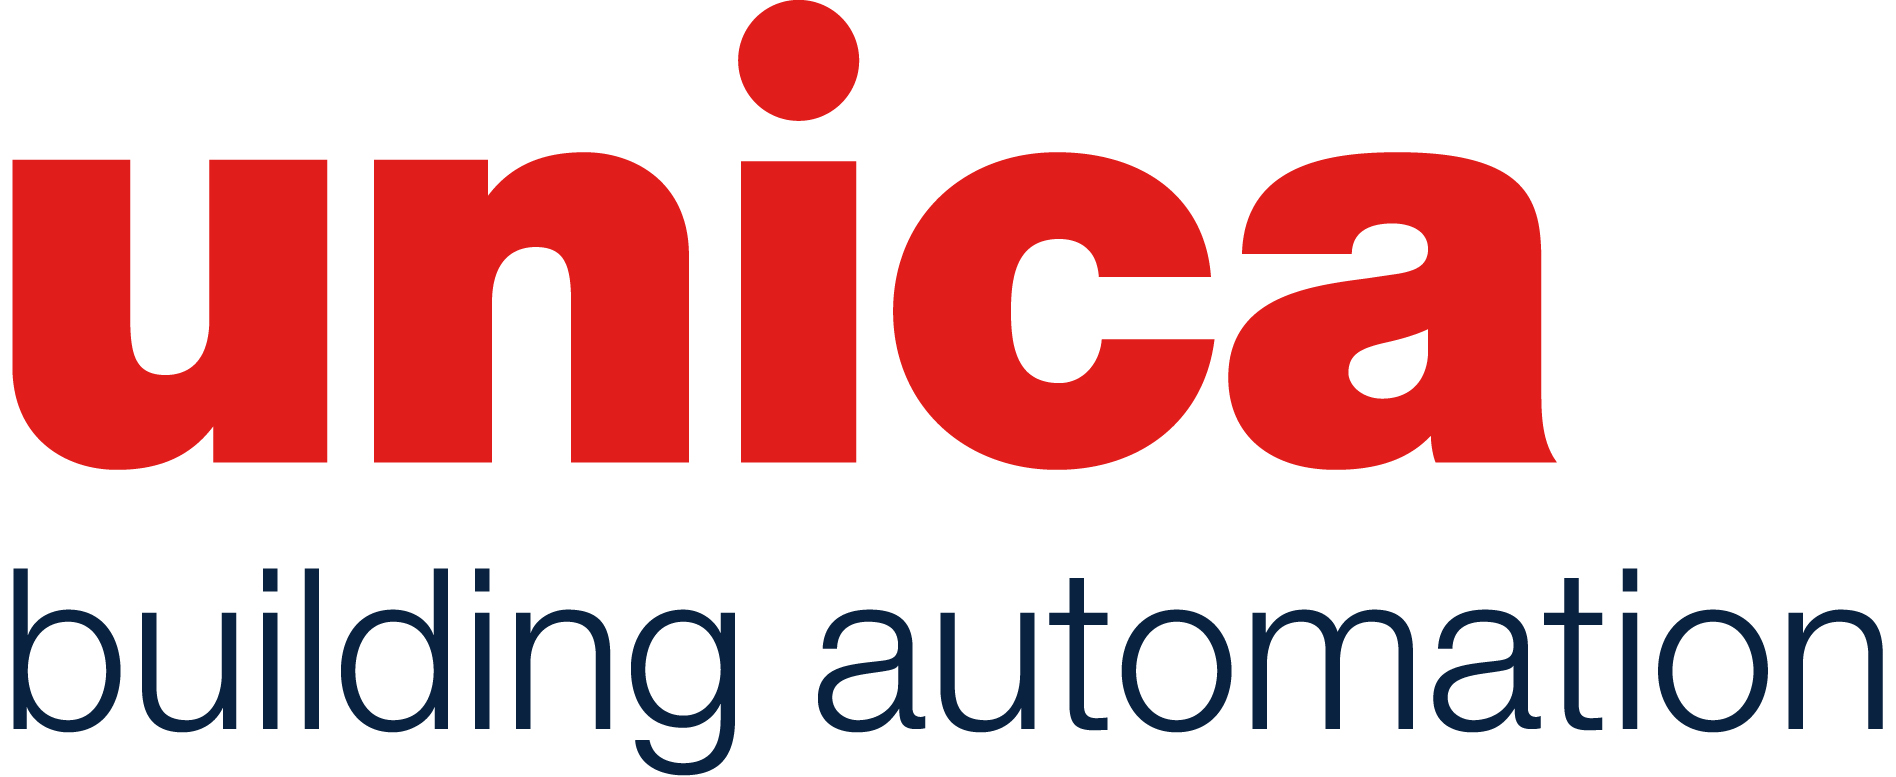 Unica Building Automation BV